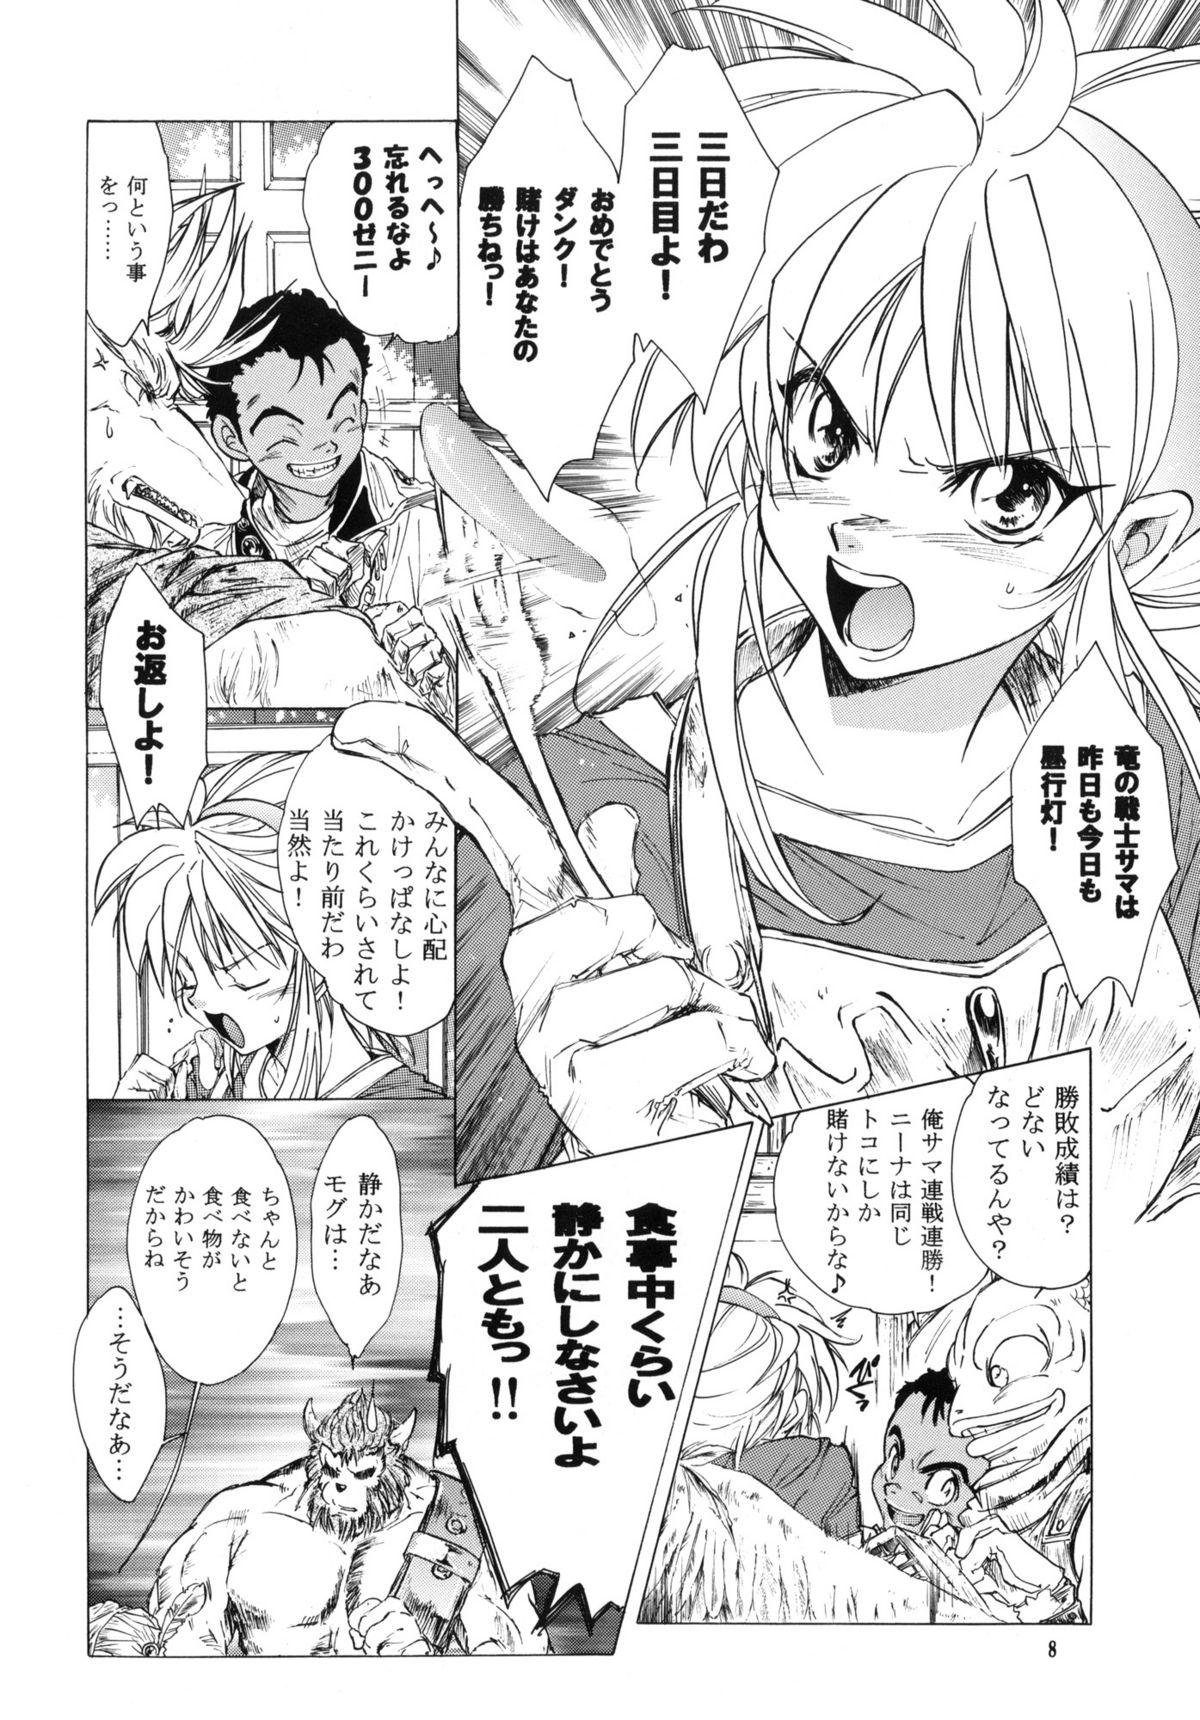 Lovers side:NINA - Ryuu no Me no Fuukei ~ second - Breath of fire Pissing - Page 7